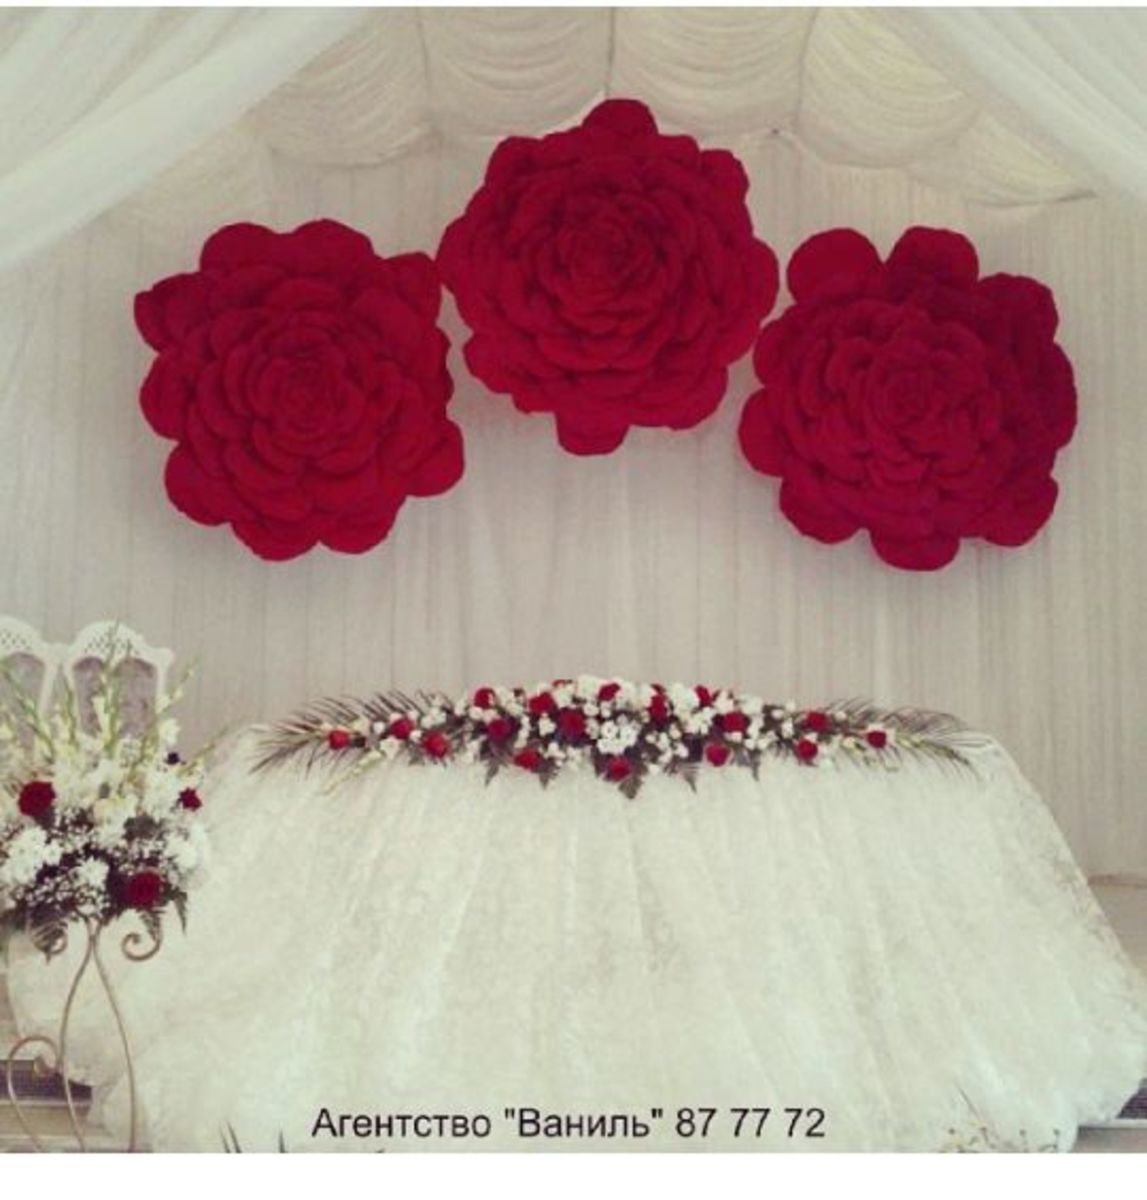 Large red flowers on a white chiffon backdrop